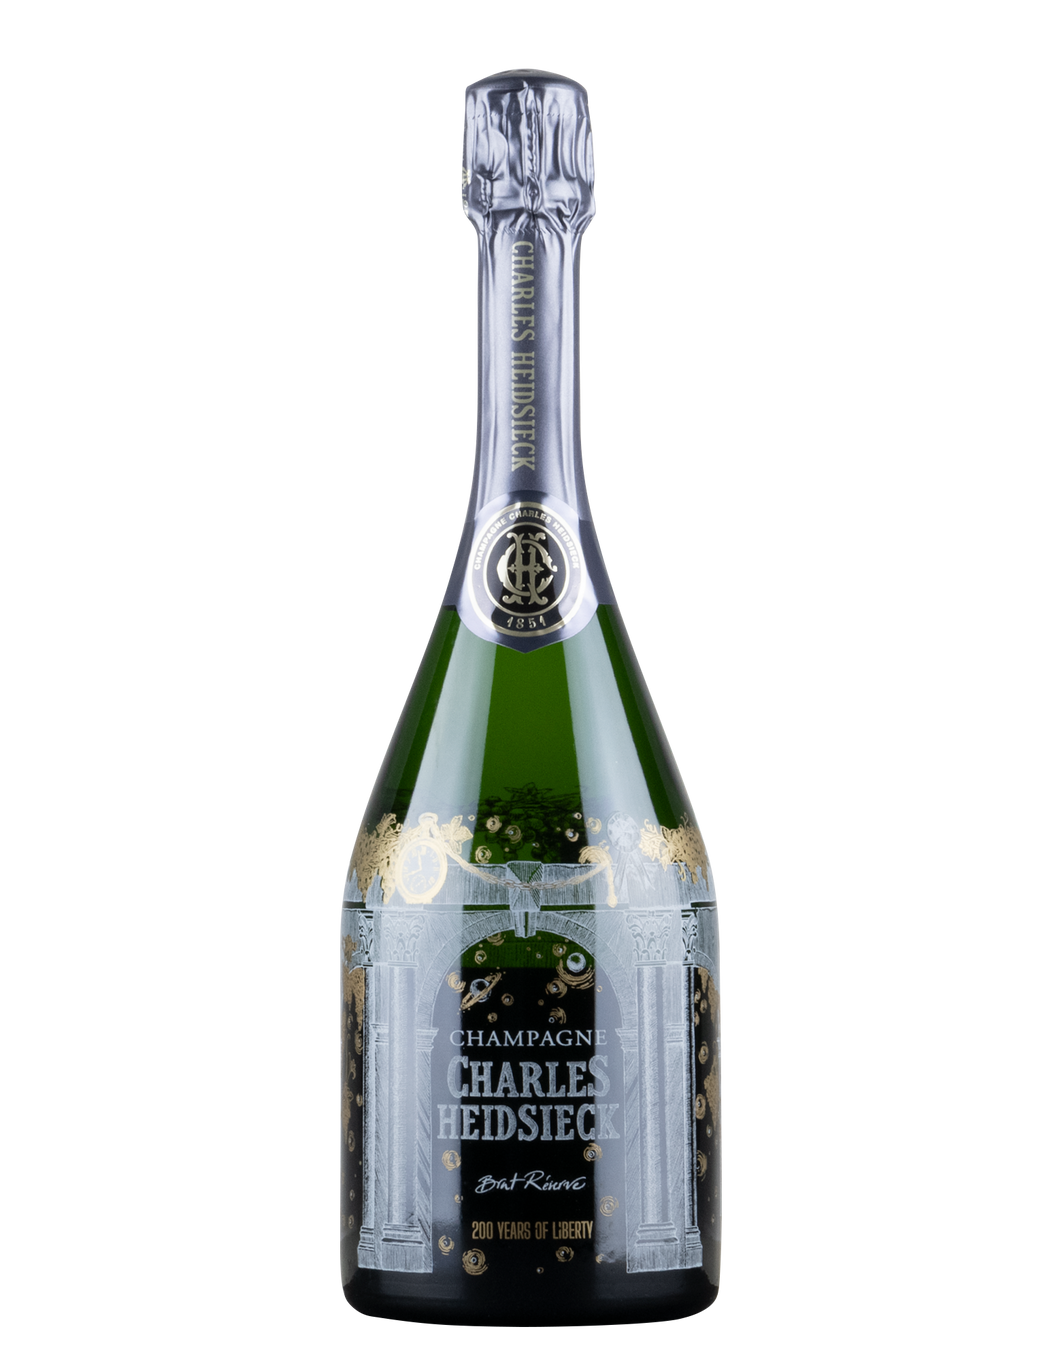 Champagne Brut Réserve 200 Years of Liberty Edition Collector